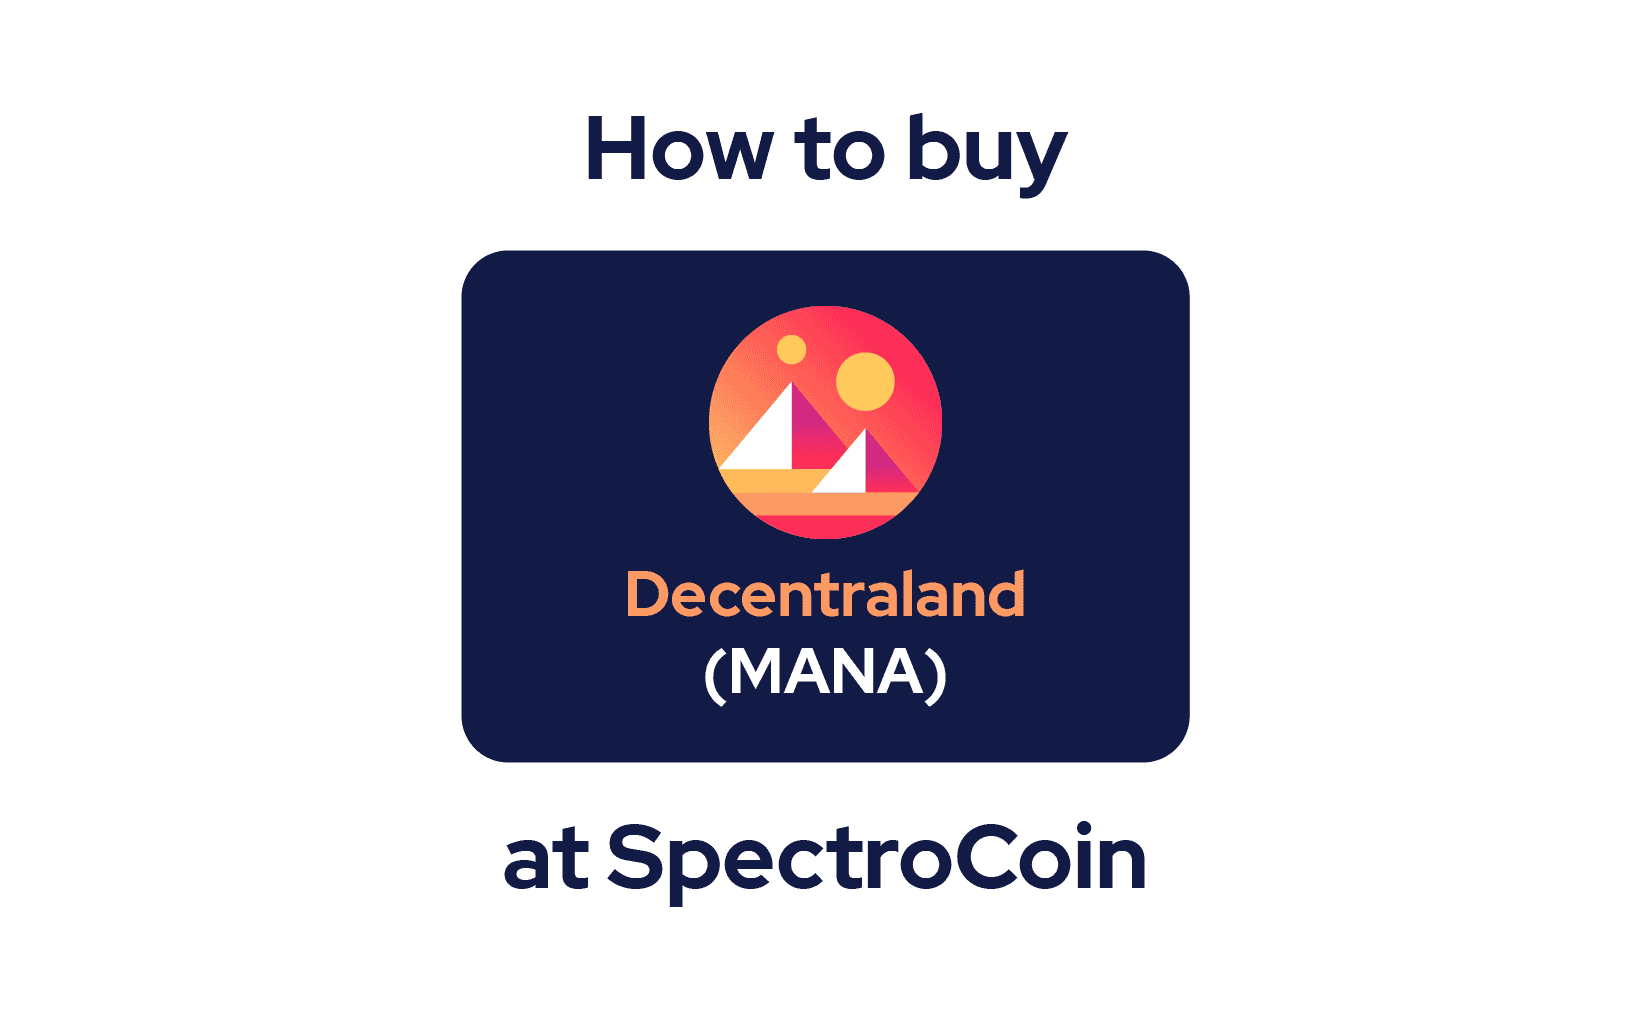 A quick guide on how to buy Decentraland on SpectroCoin